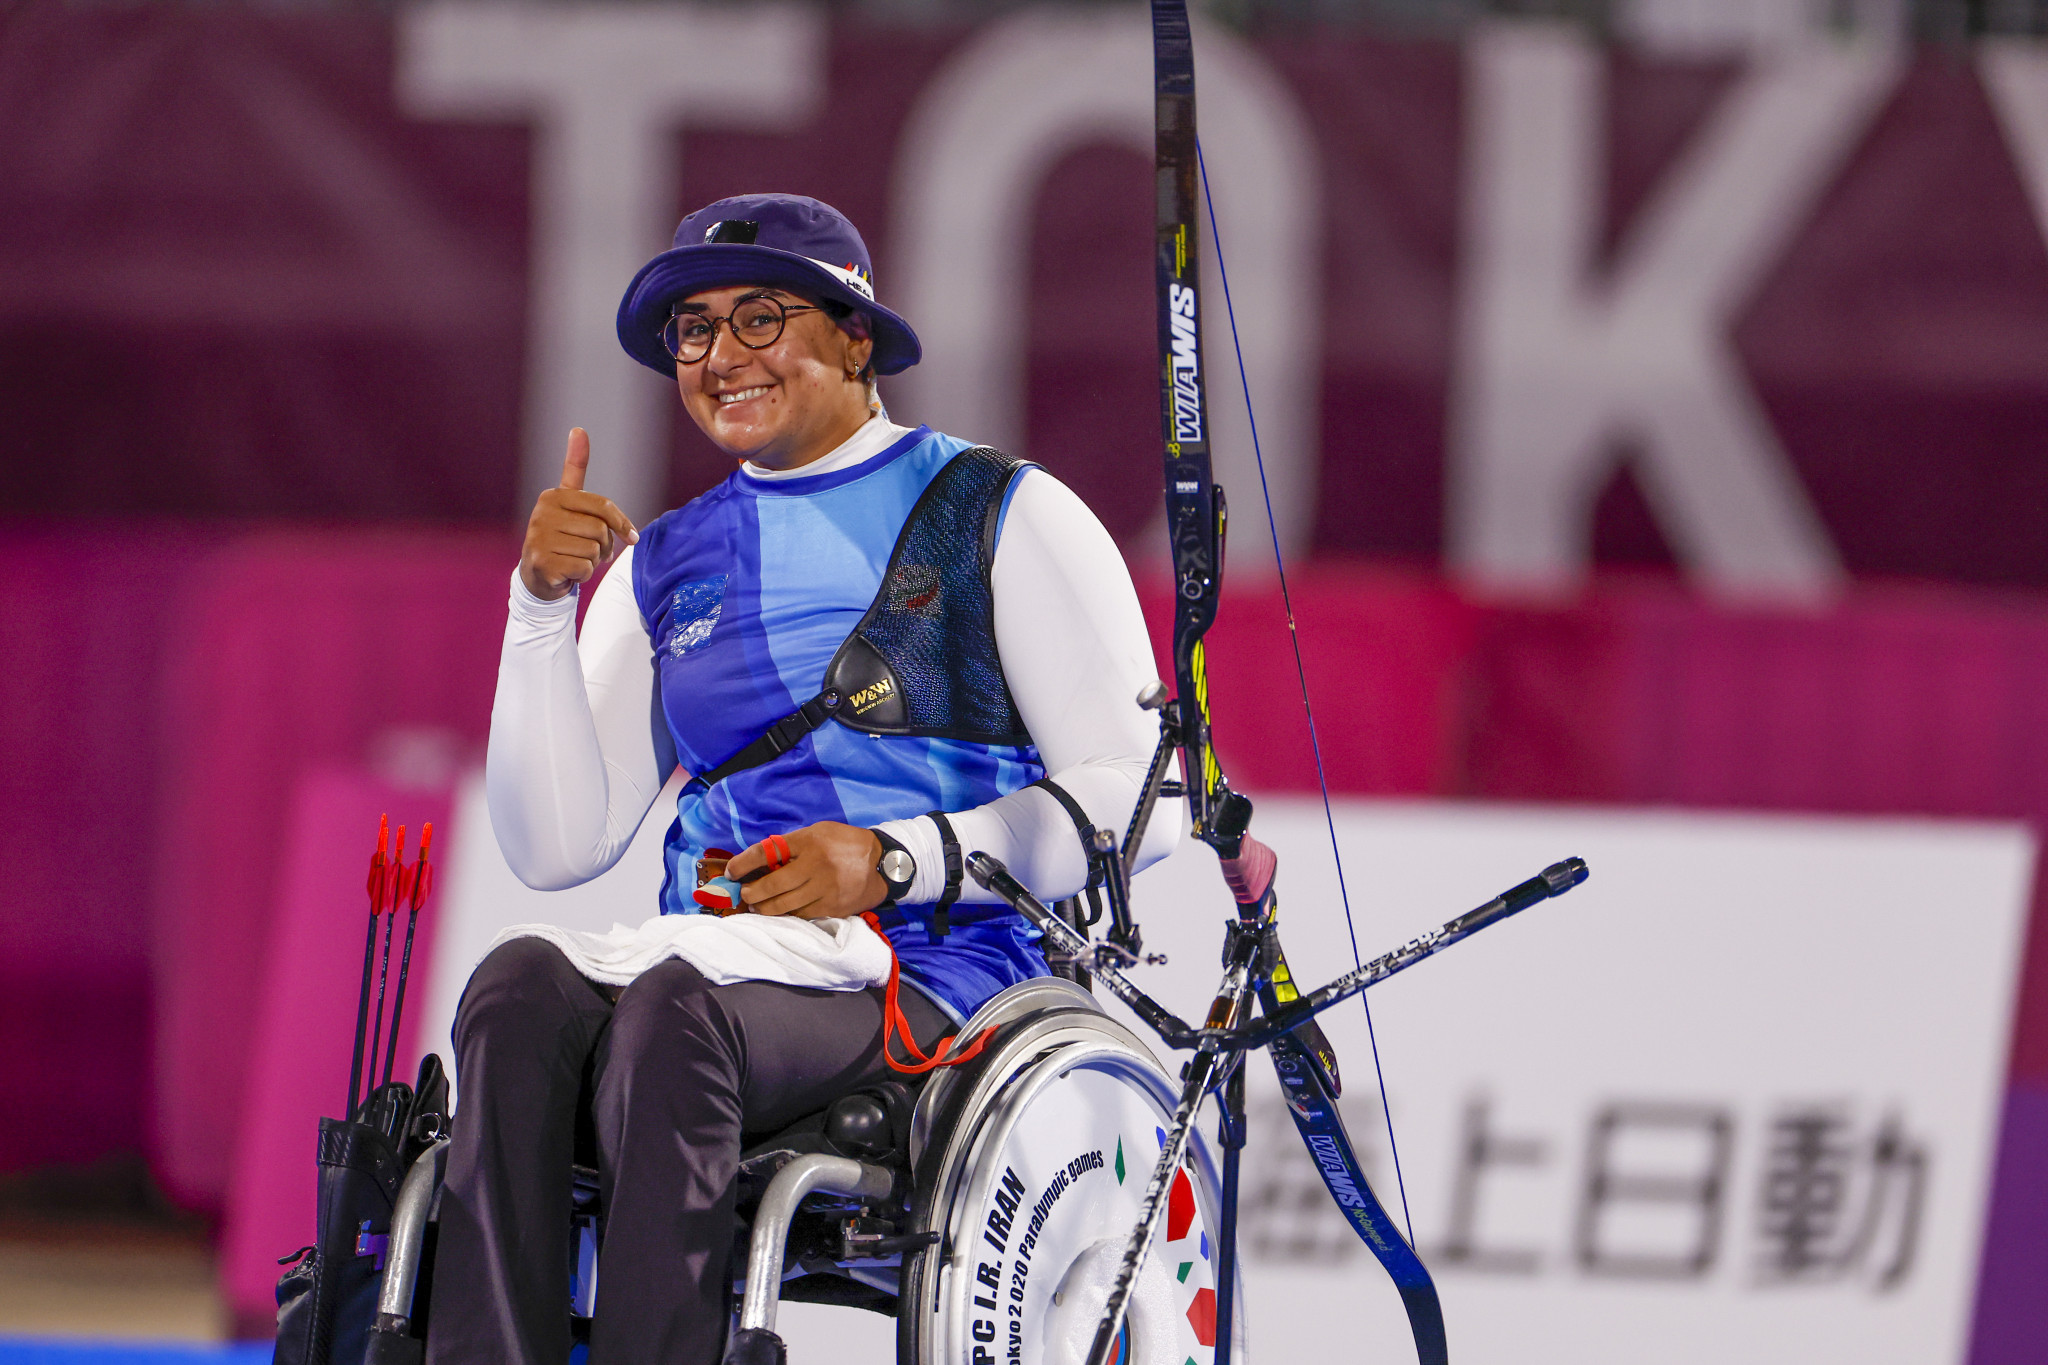 Iran's Zahra Nemati won her third individual recurve archery gold medal at her third consecutive Games, with a 6-5 victory over Italian Vincenza Petrilli in the final ©Getty Images